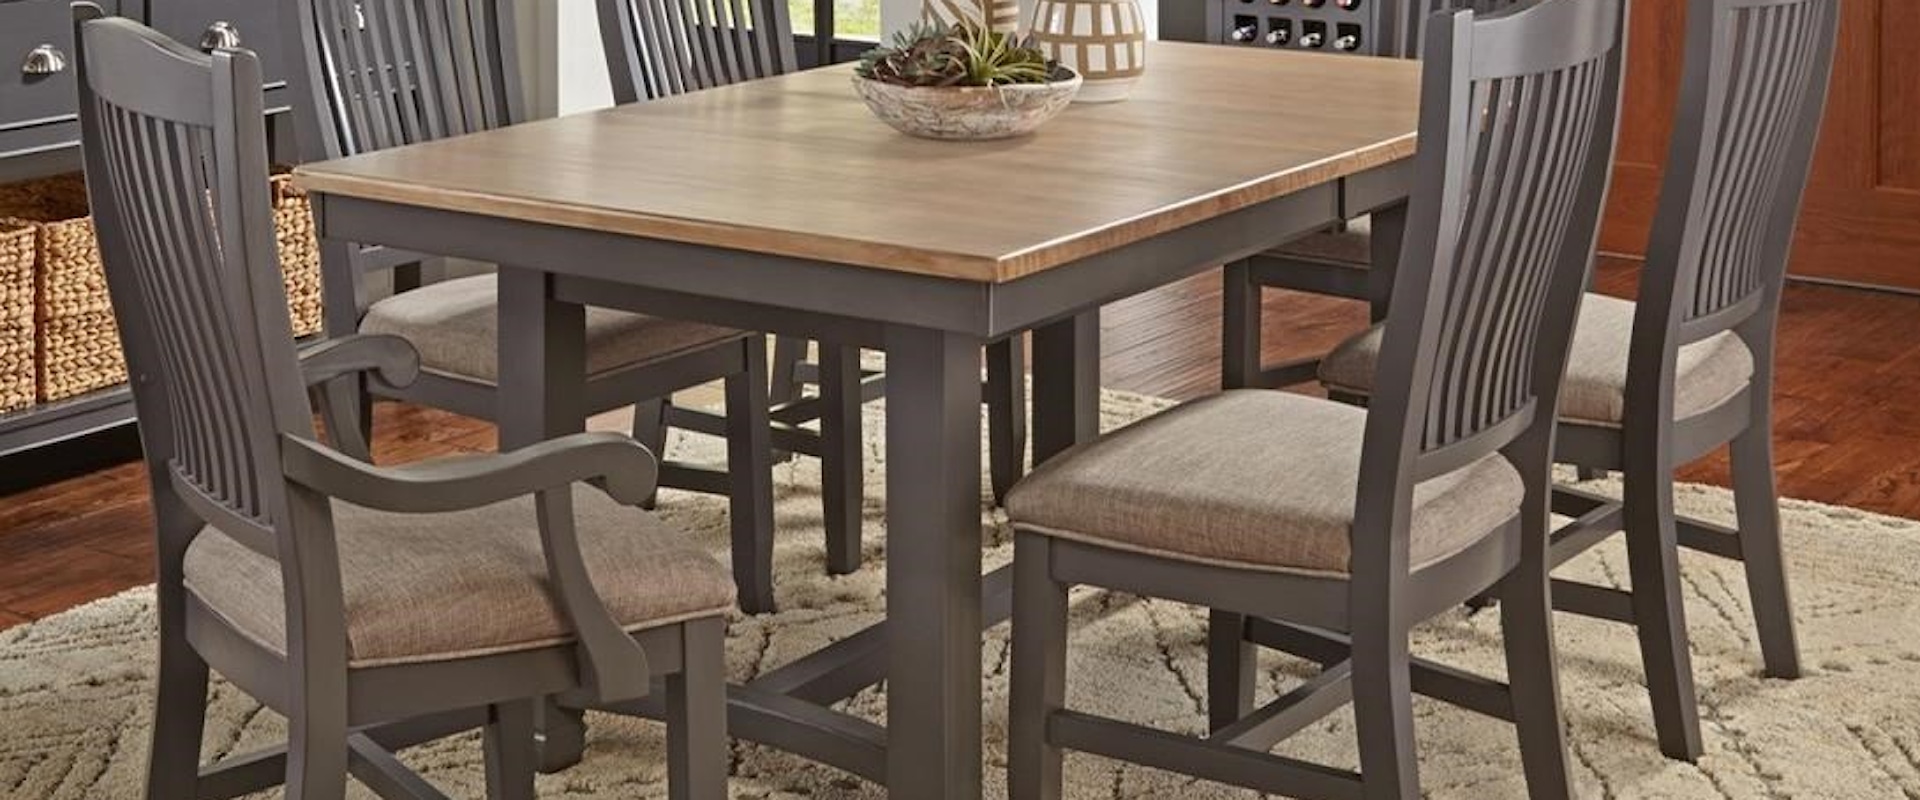 7 Pc Table & Chair Set- (Trestle Table, 4 Upholstered Side Chairs & 2 Upholstered Arm Chairs)